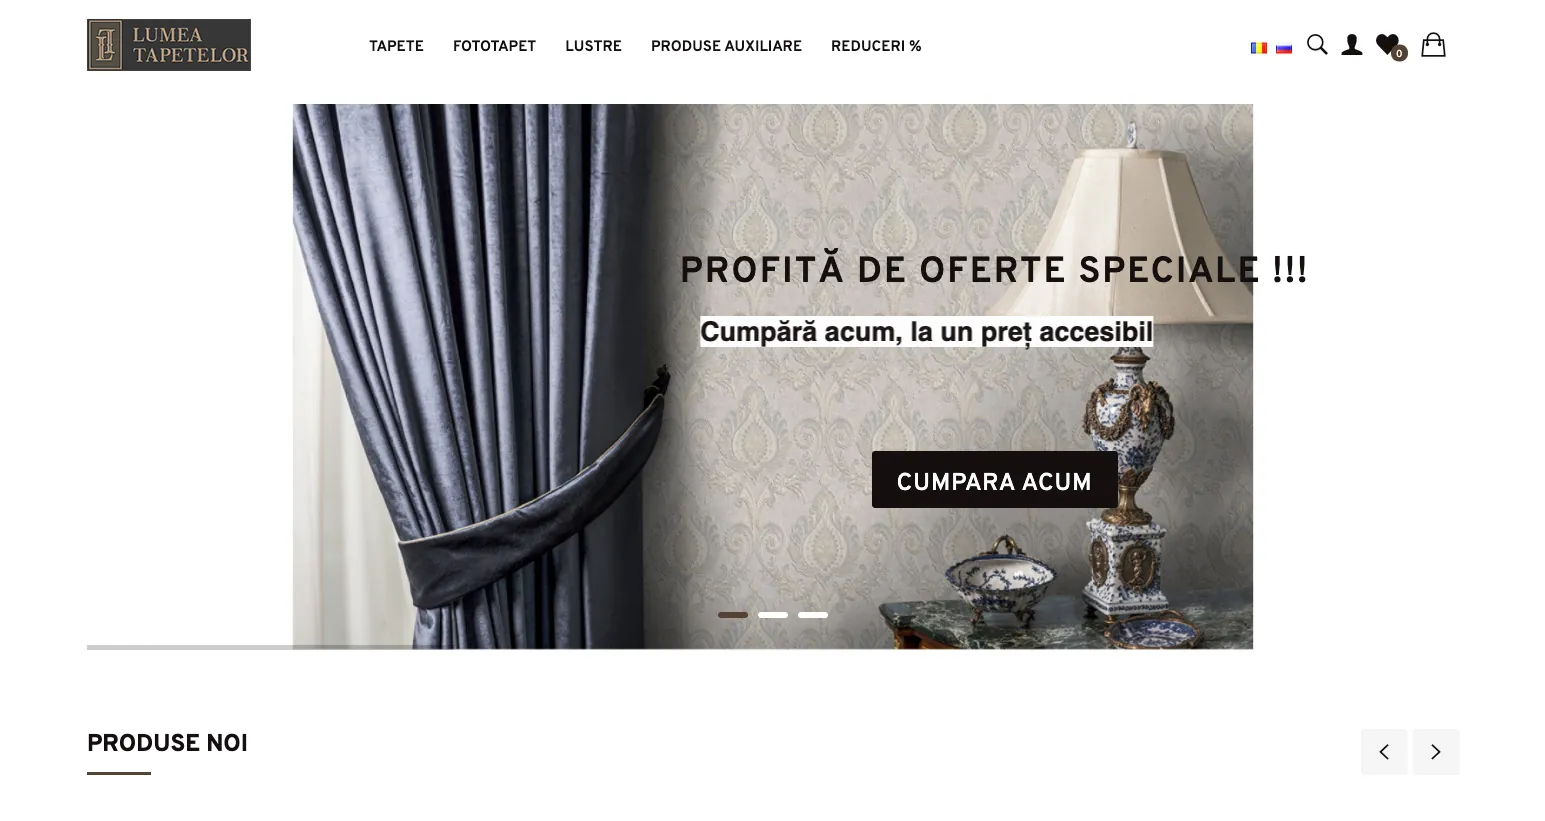 Redesign of the online store Lumea Tapetelor 2